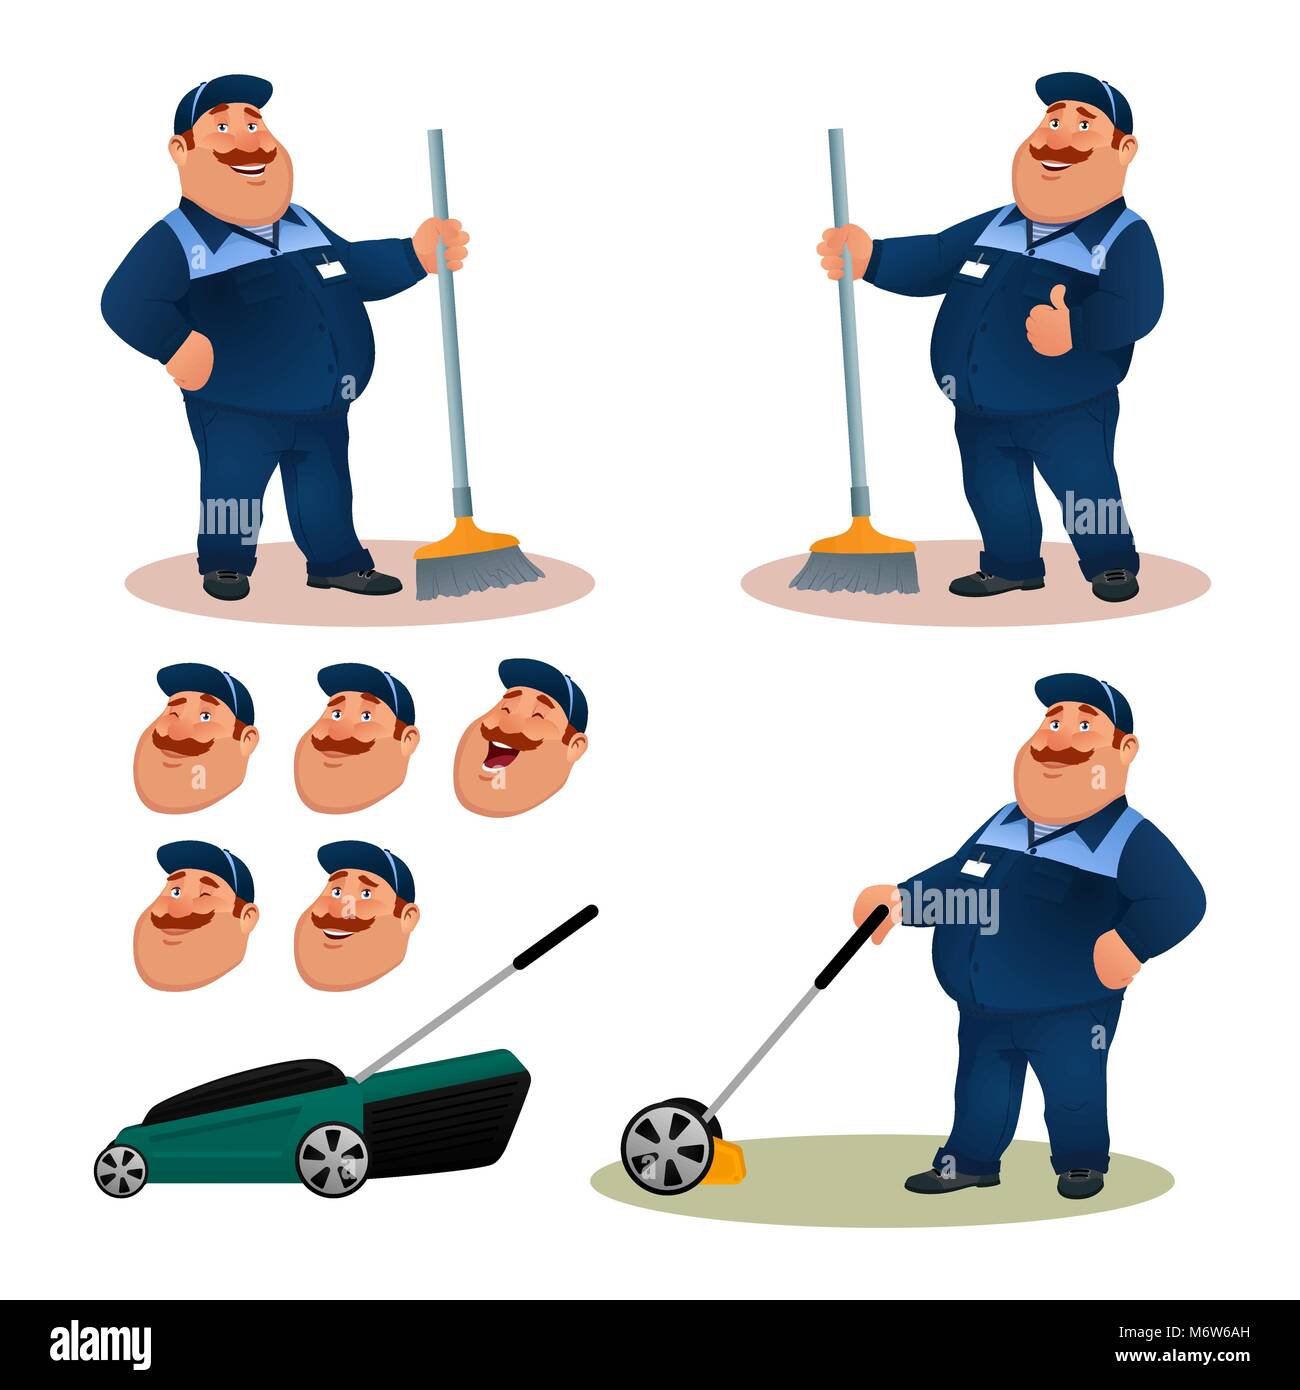 Funny cartoon janitor set with emotions. Smiling fat character gardener in blue suit sweeping floor with broom. Happy flat cleaner with lawn mower and face expressions. Colorful vector illustration. Stock Vector